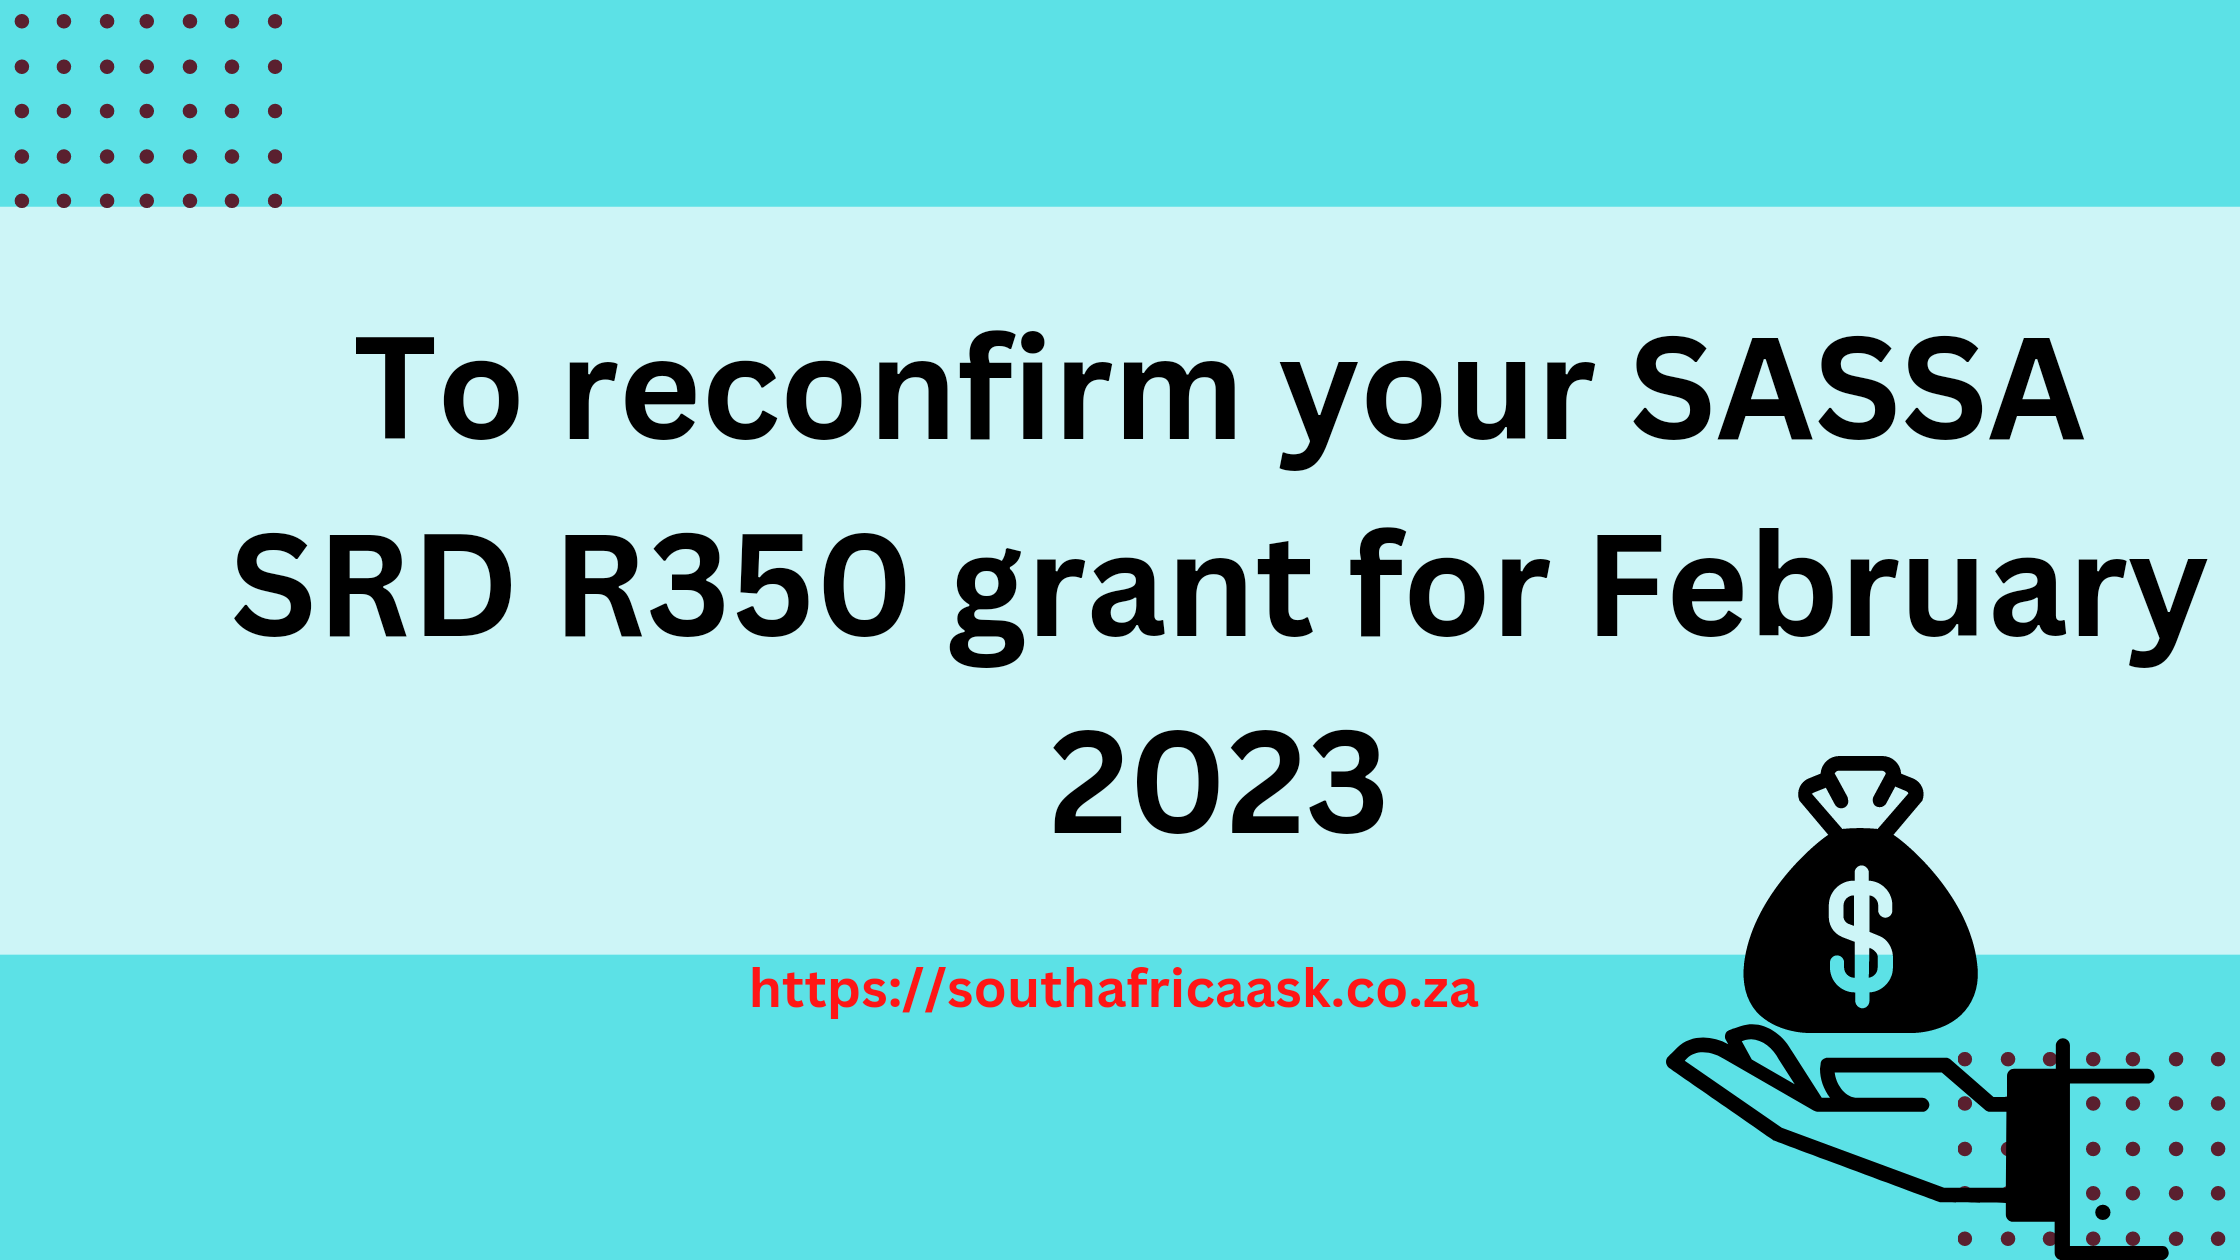 To reconfirm your SASSA SRD R350 grant for February 2023